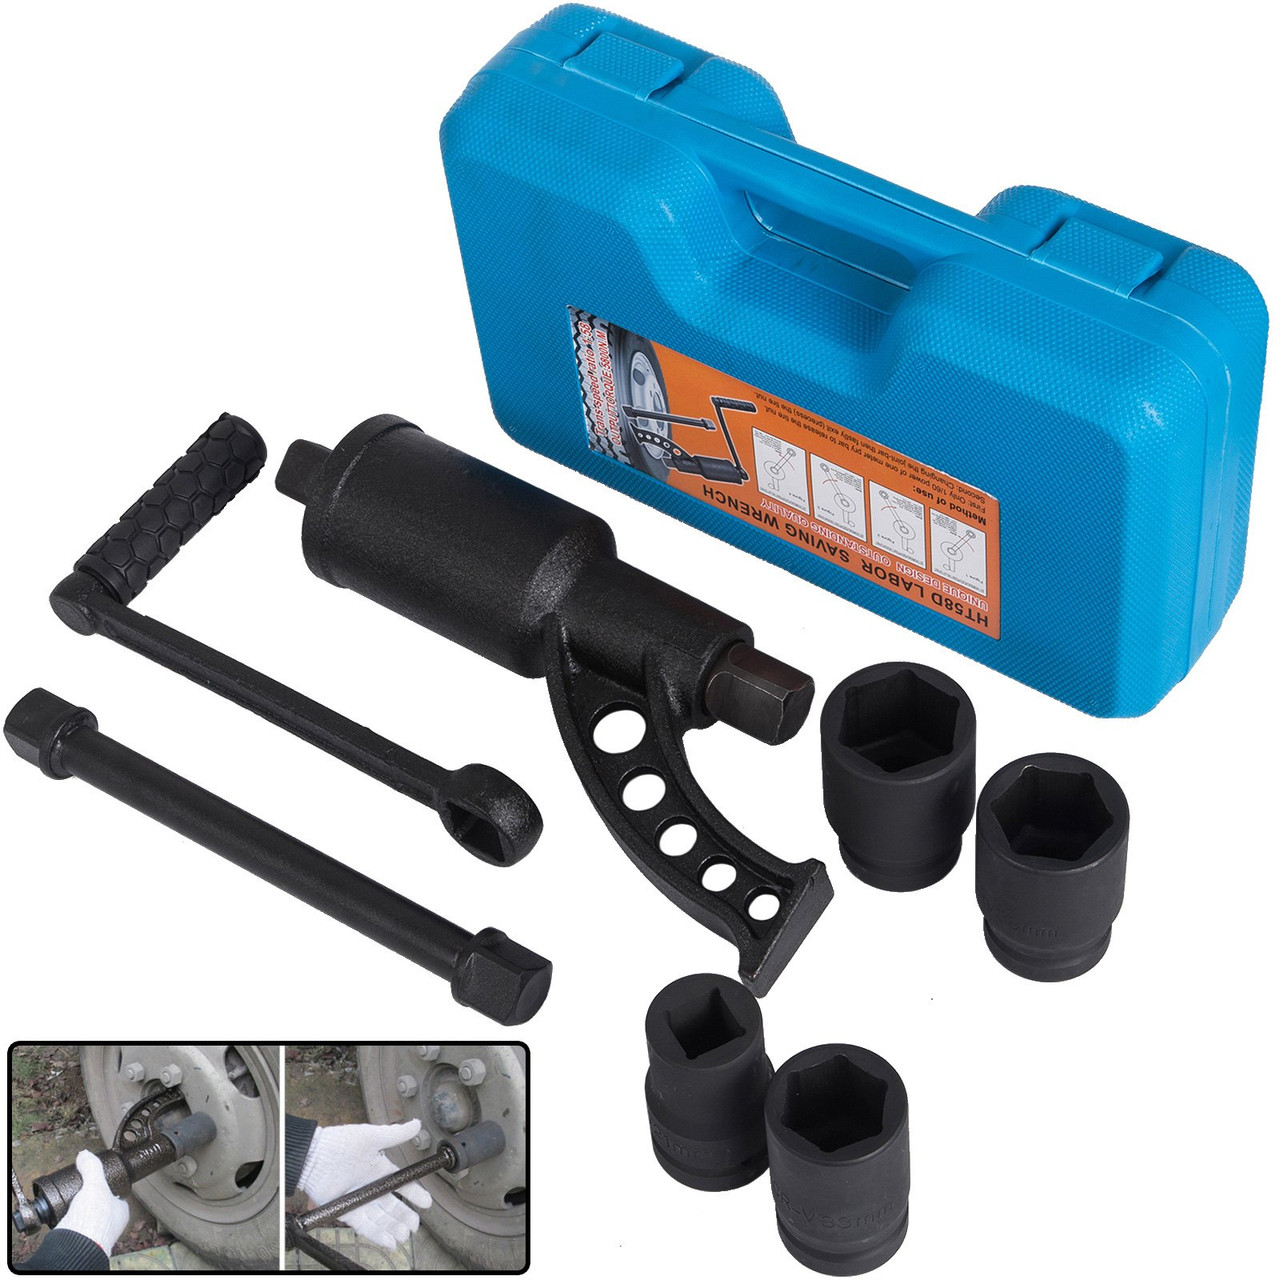 1:78 Torque Multiplier Wrench 7500 NM Lug Nut Wrench Set Lugnut Remover with Case Labor Saving Wrench Tool Heavy Duty Torque Multiplier Tool for Truck Trailer RV